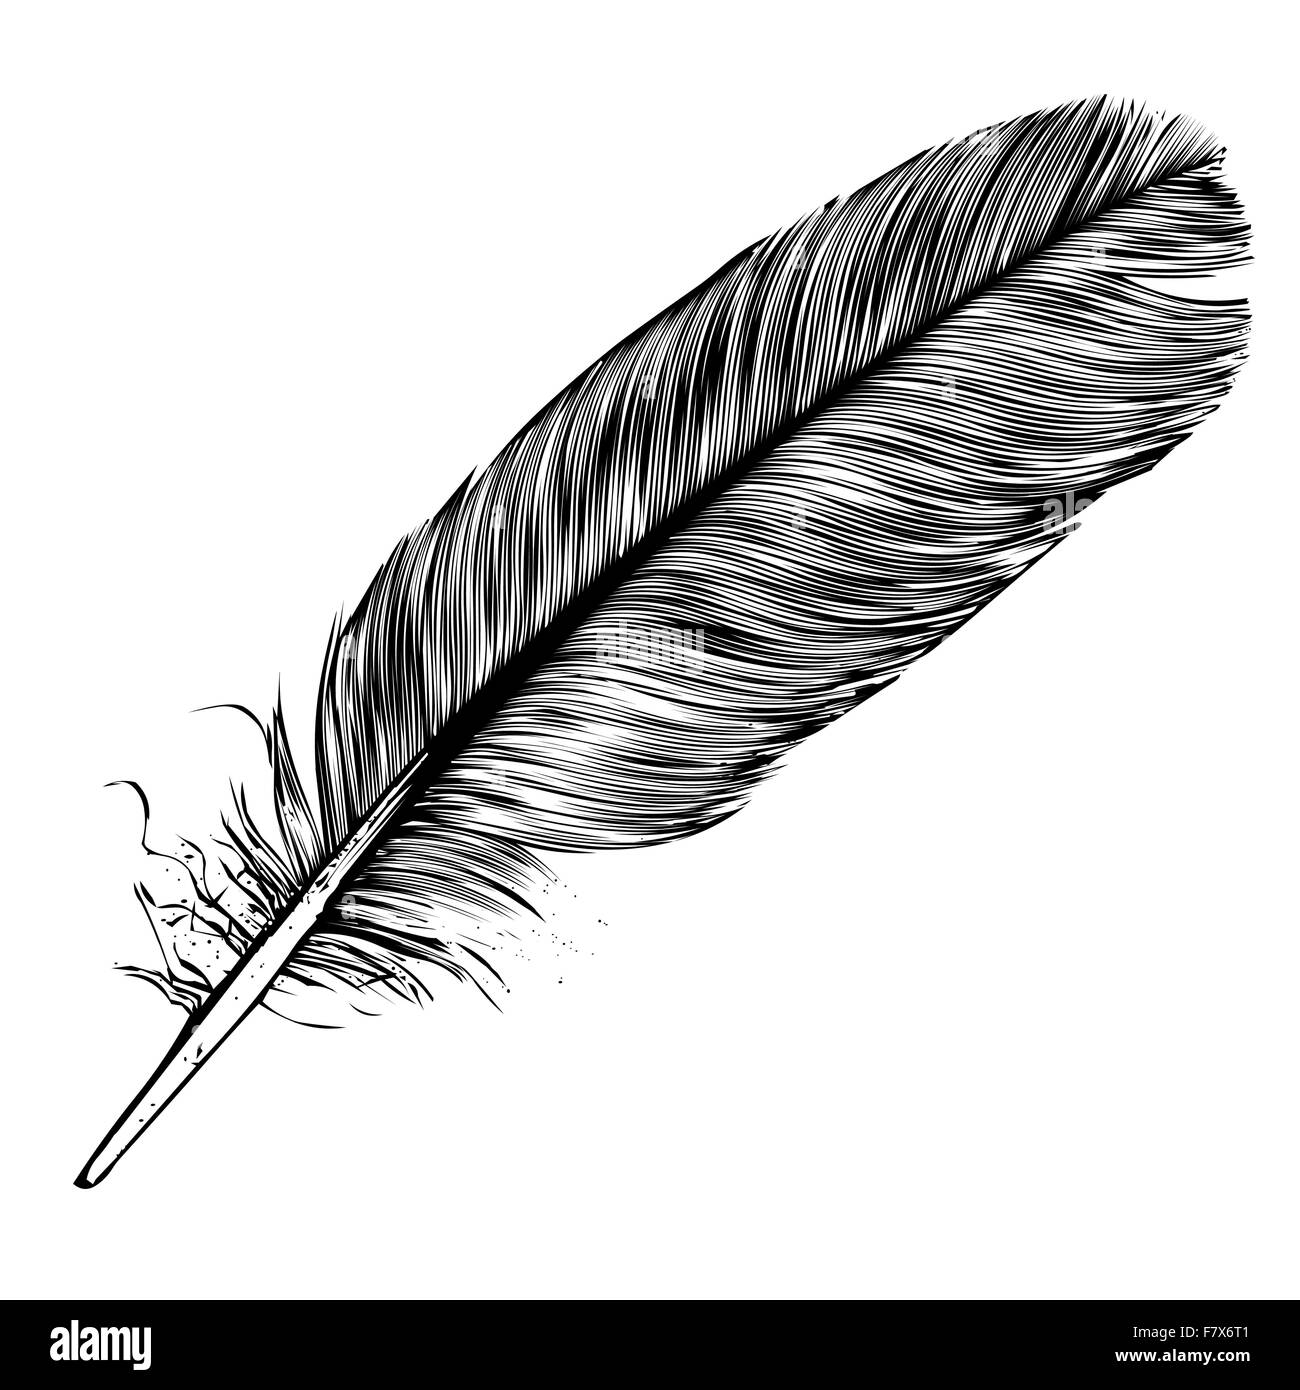 Plume Stock Vector Images - Alamy